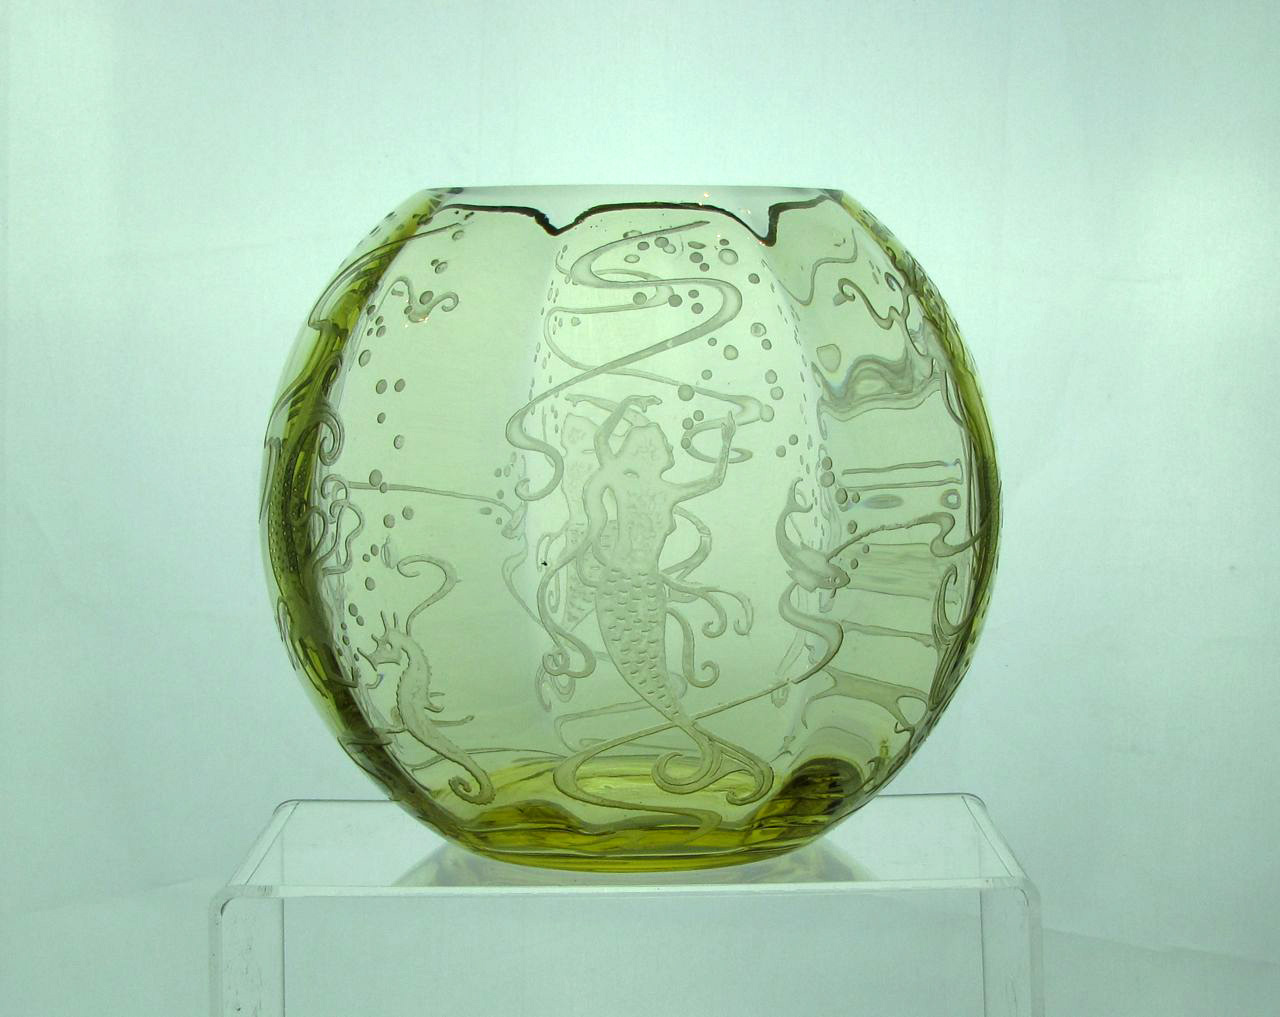 Heisey #4045 Ball Vase, Wide Optic, 7 inch, Sahara with #469 Mermaids etch